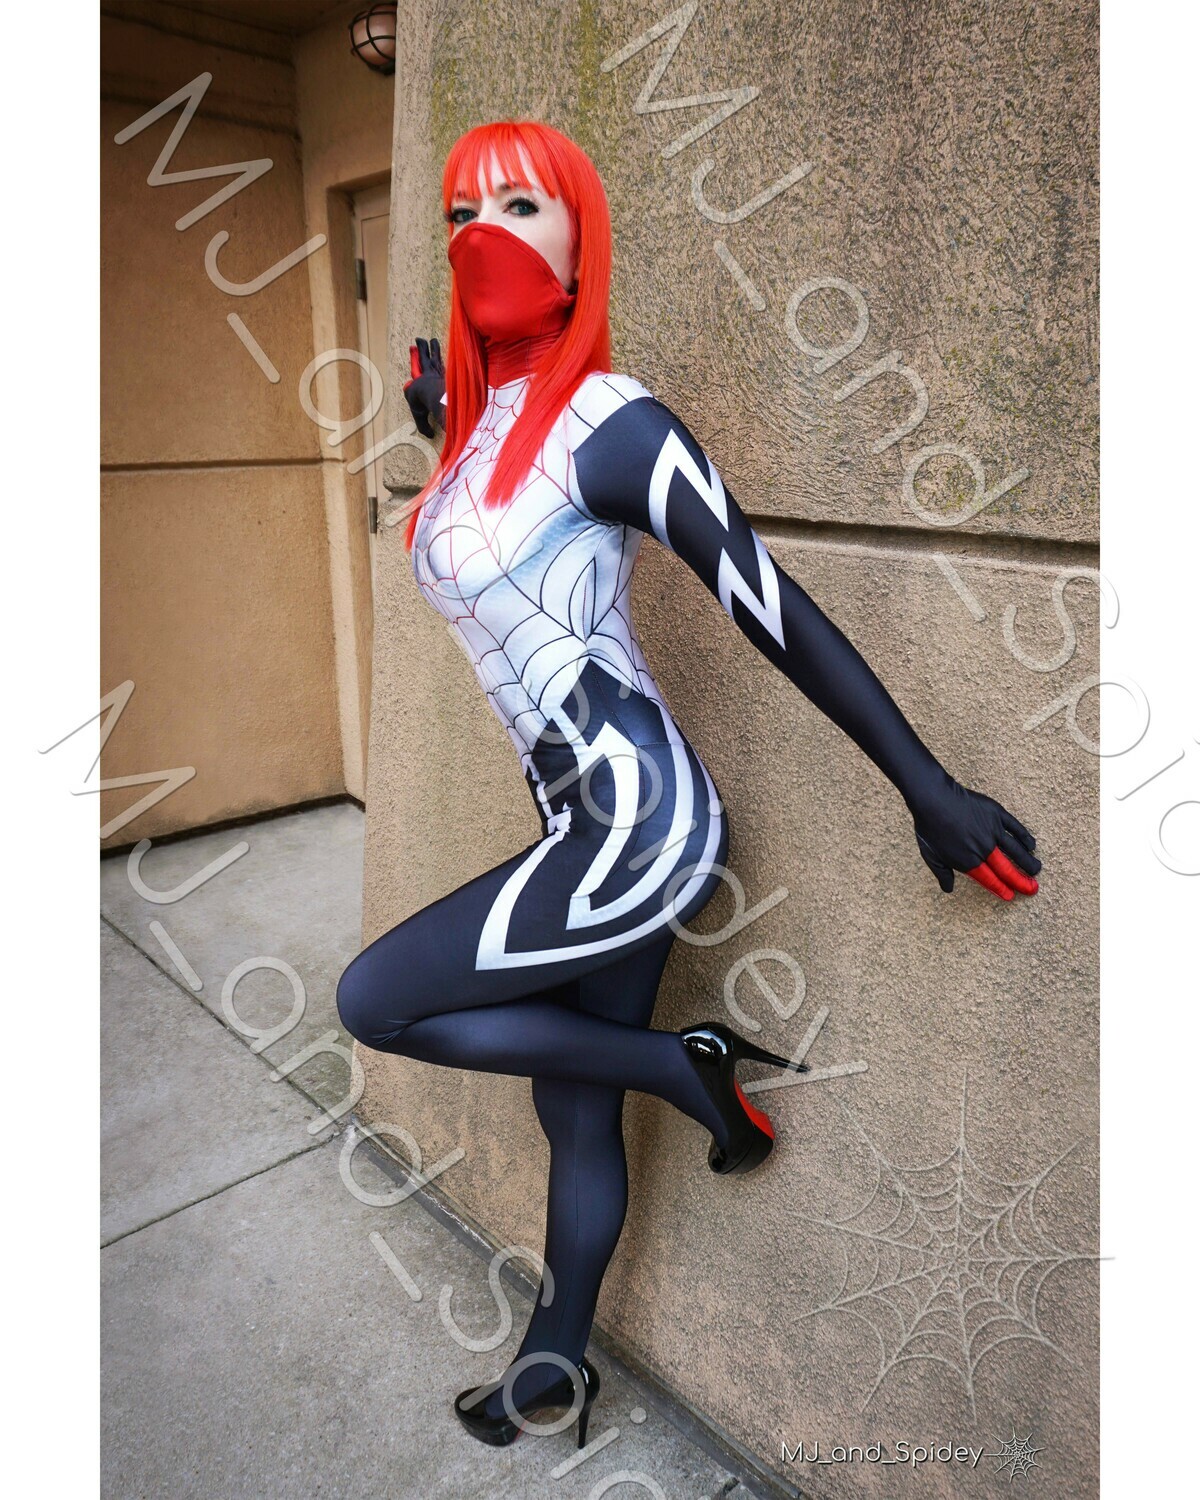 Marvel - Spider-Man - Mary Jane Watson - Silk 3 - Digital Cosplay Image (@MJ_and_Spidey, MJ and Spidey, Comics)